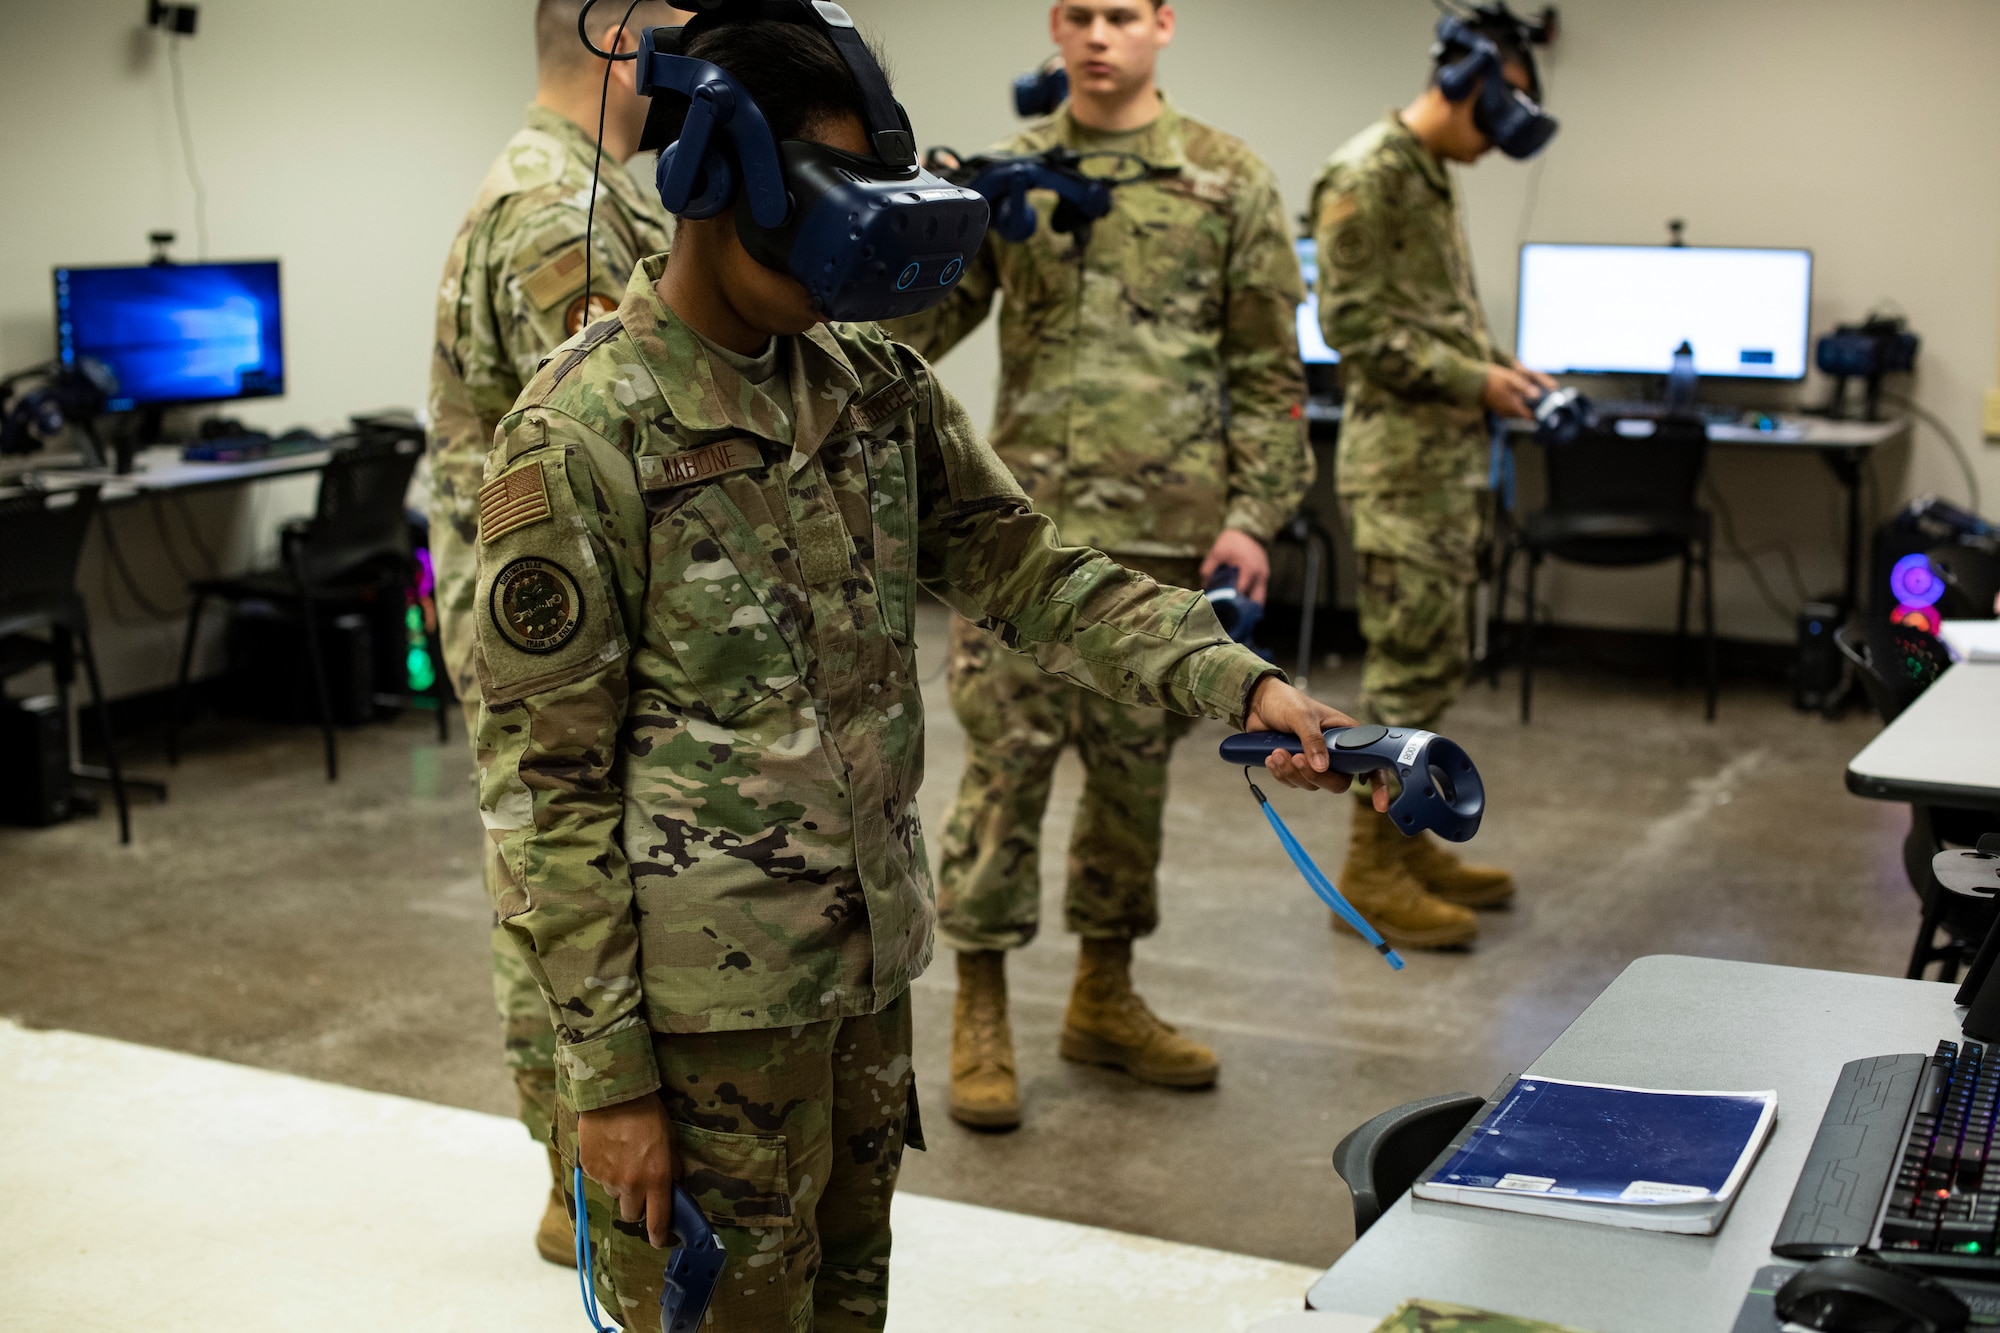 Airman Leeah Mabone, a 362nd Training Squadron heavy crew chief student, uses virtual reality during a classroom training session at Sheppard Air Force Base, Texas, March 3, 2020. Mabone and other Airmen in her class are a part of a Maintenance Next test class that introduces and gauges the effectiveness of using virtual reality and other technologies in the technical training environment. (U.S. Air Force photo by John Ingle)